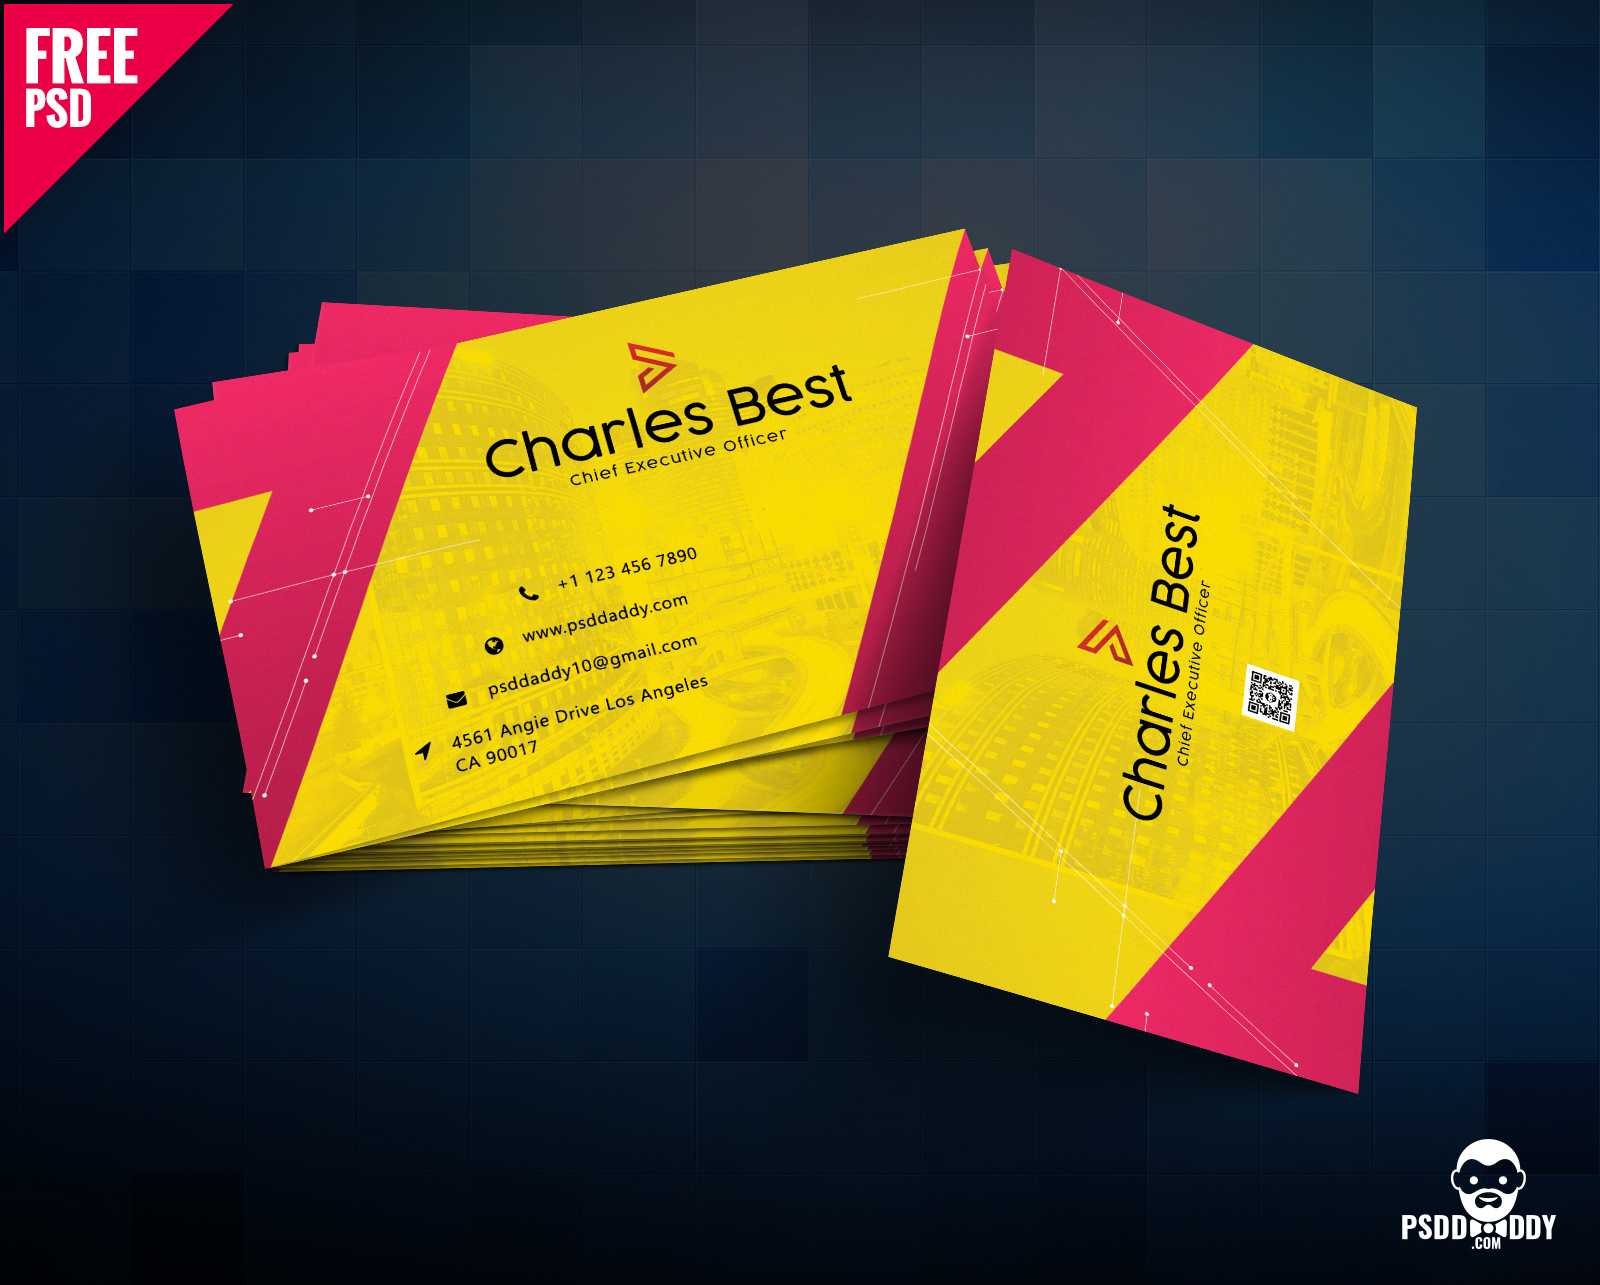 Download] Creative Business Card Free Psd | Psddaddy Throughout Unique Business Card Templates Free